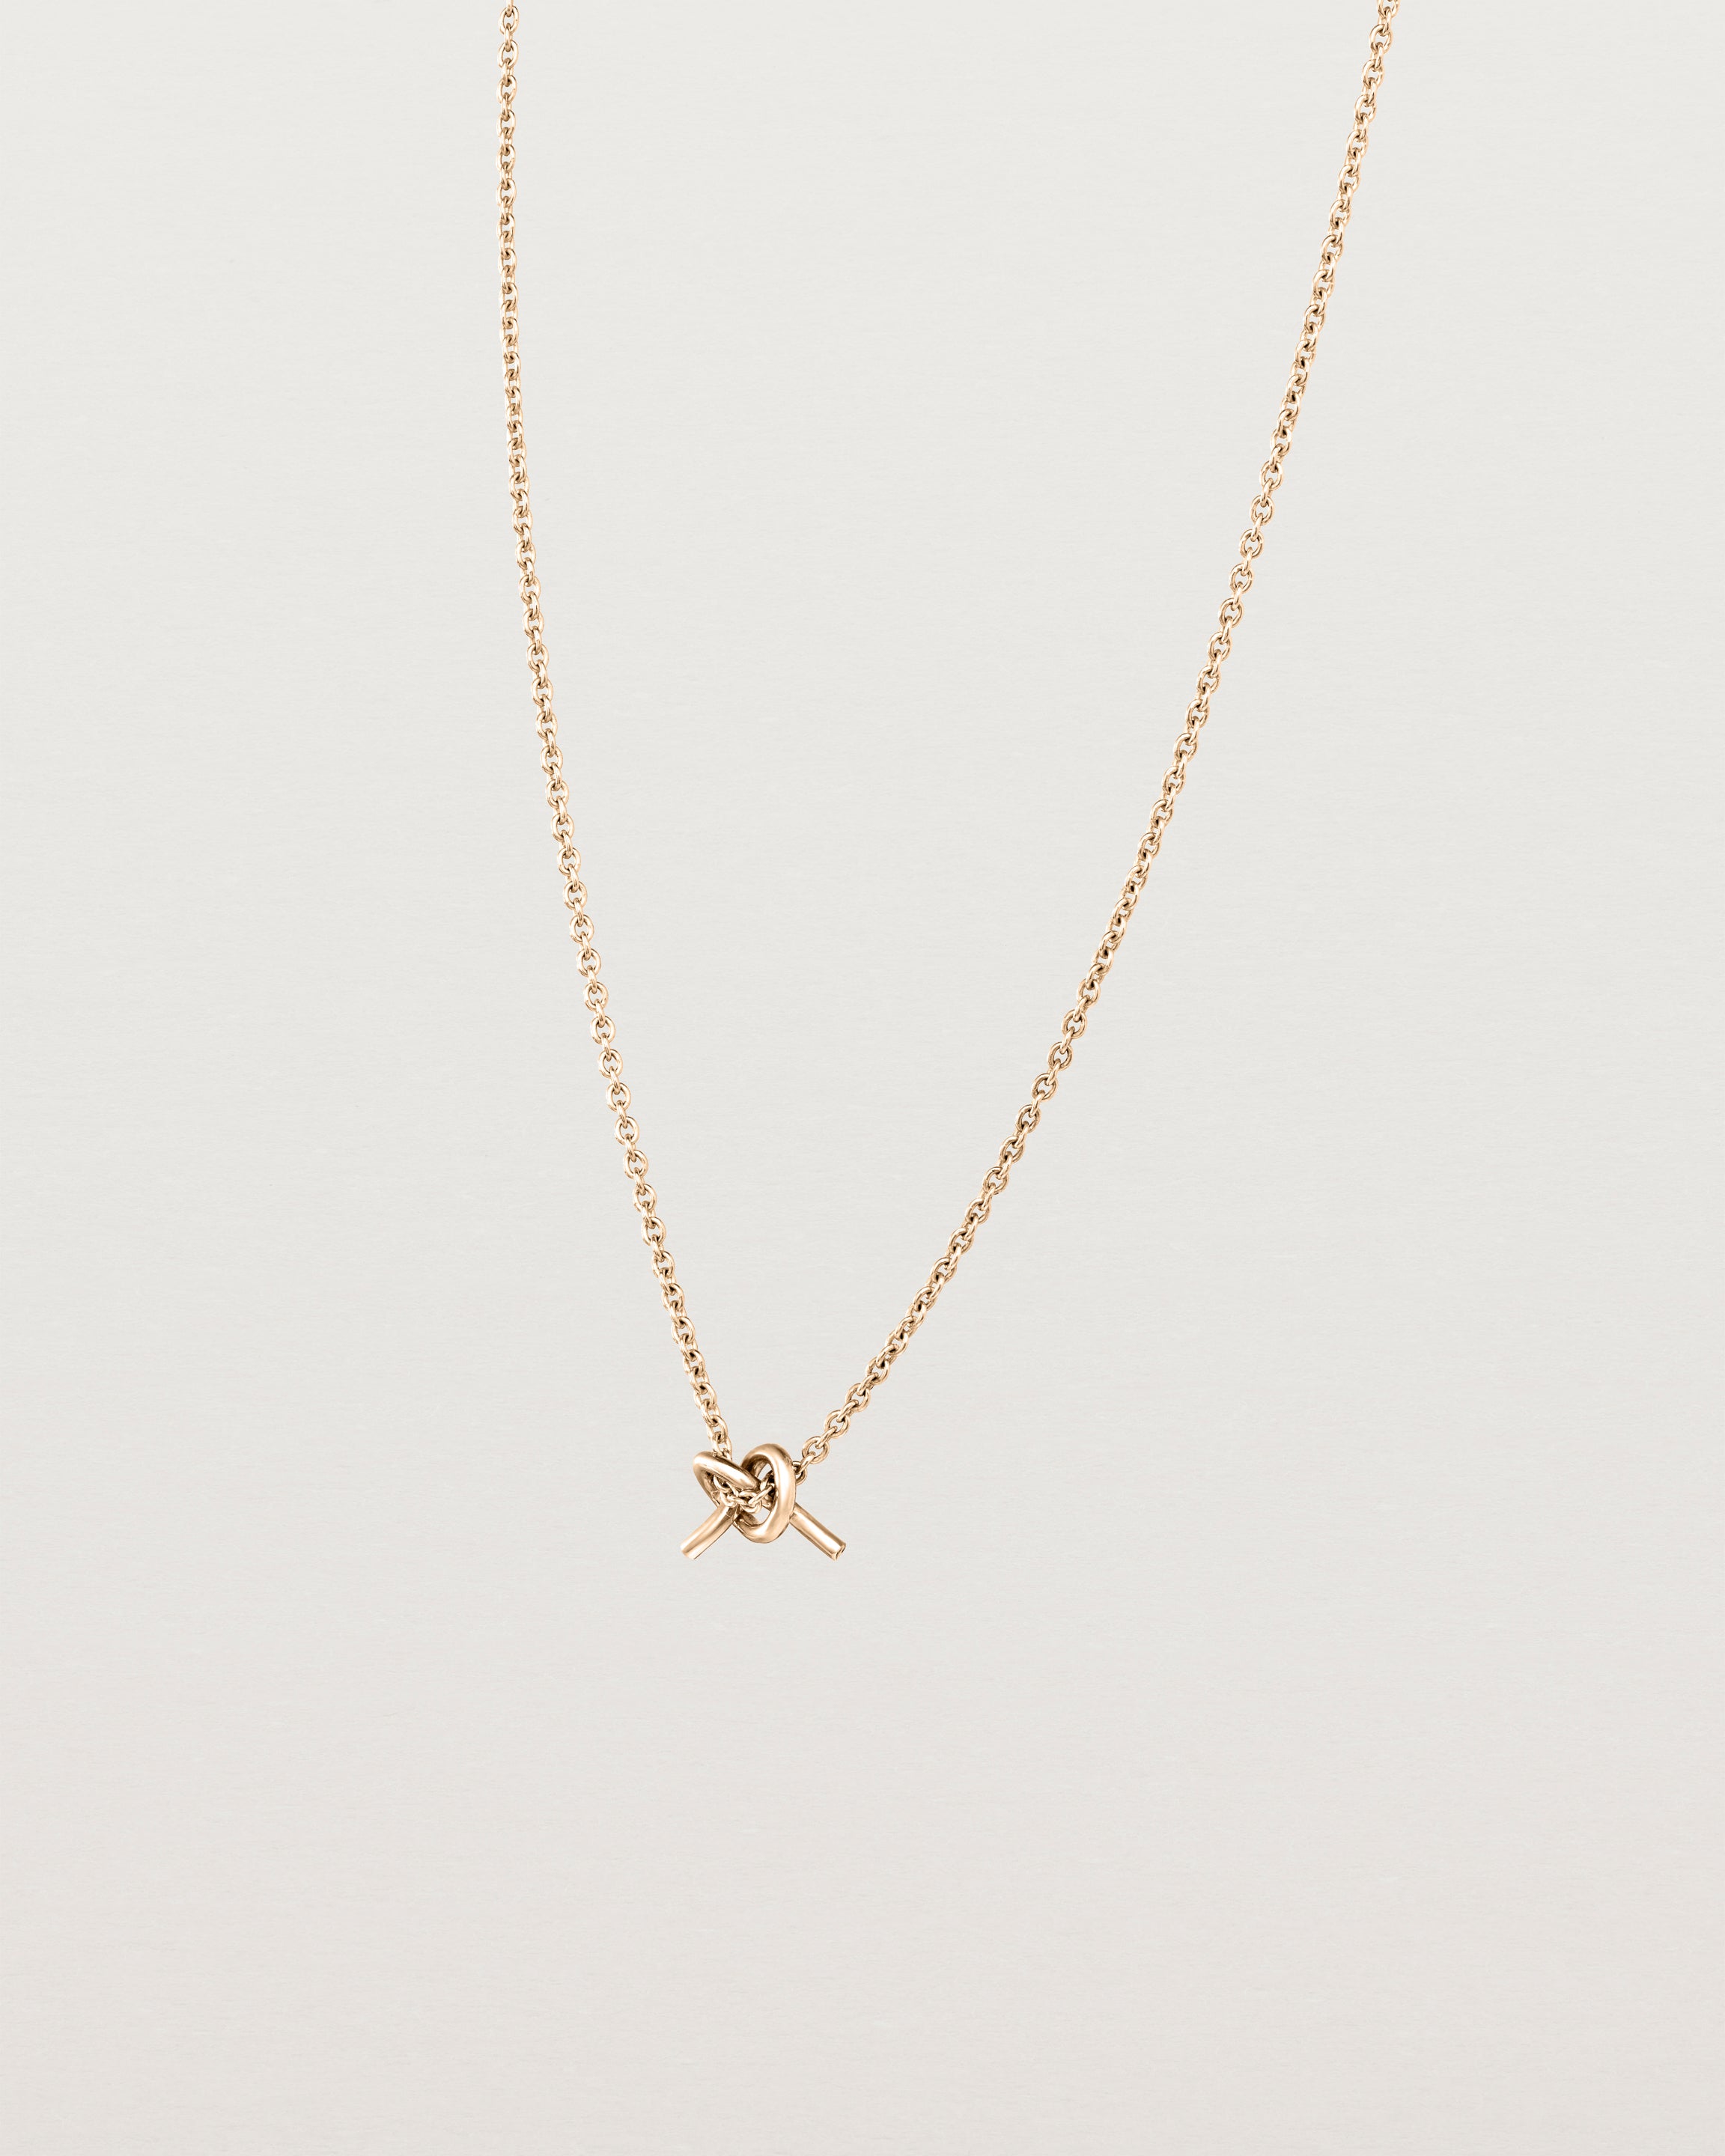 Angled view of the Cara Necklace in rose gold.